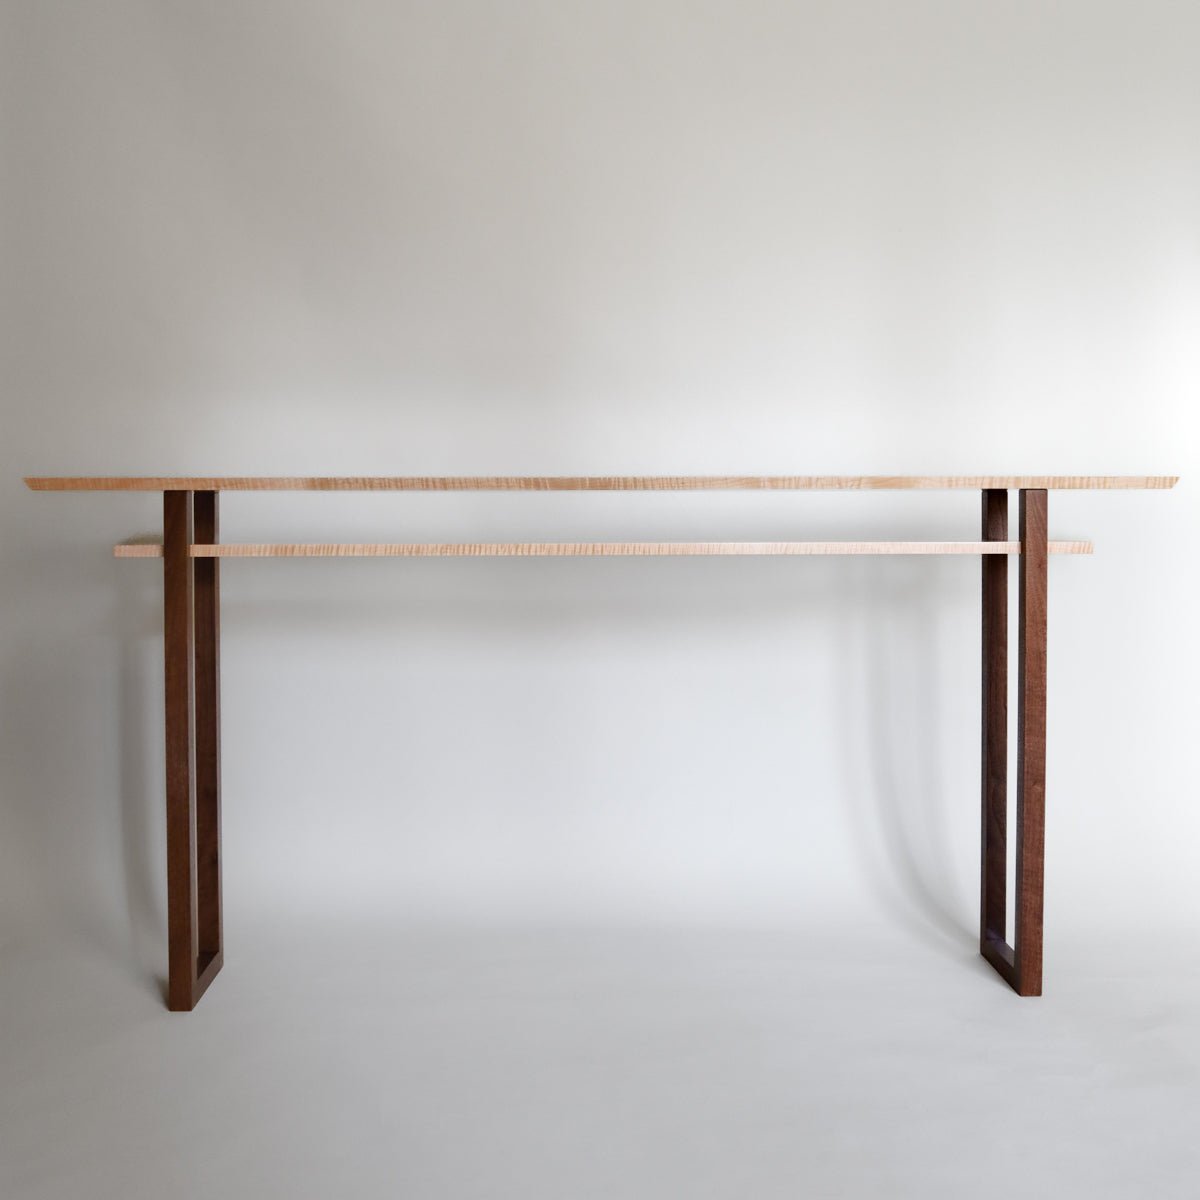 A modern wood long narrow console table handcrafted by Mokuzai Furniture.